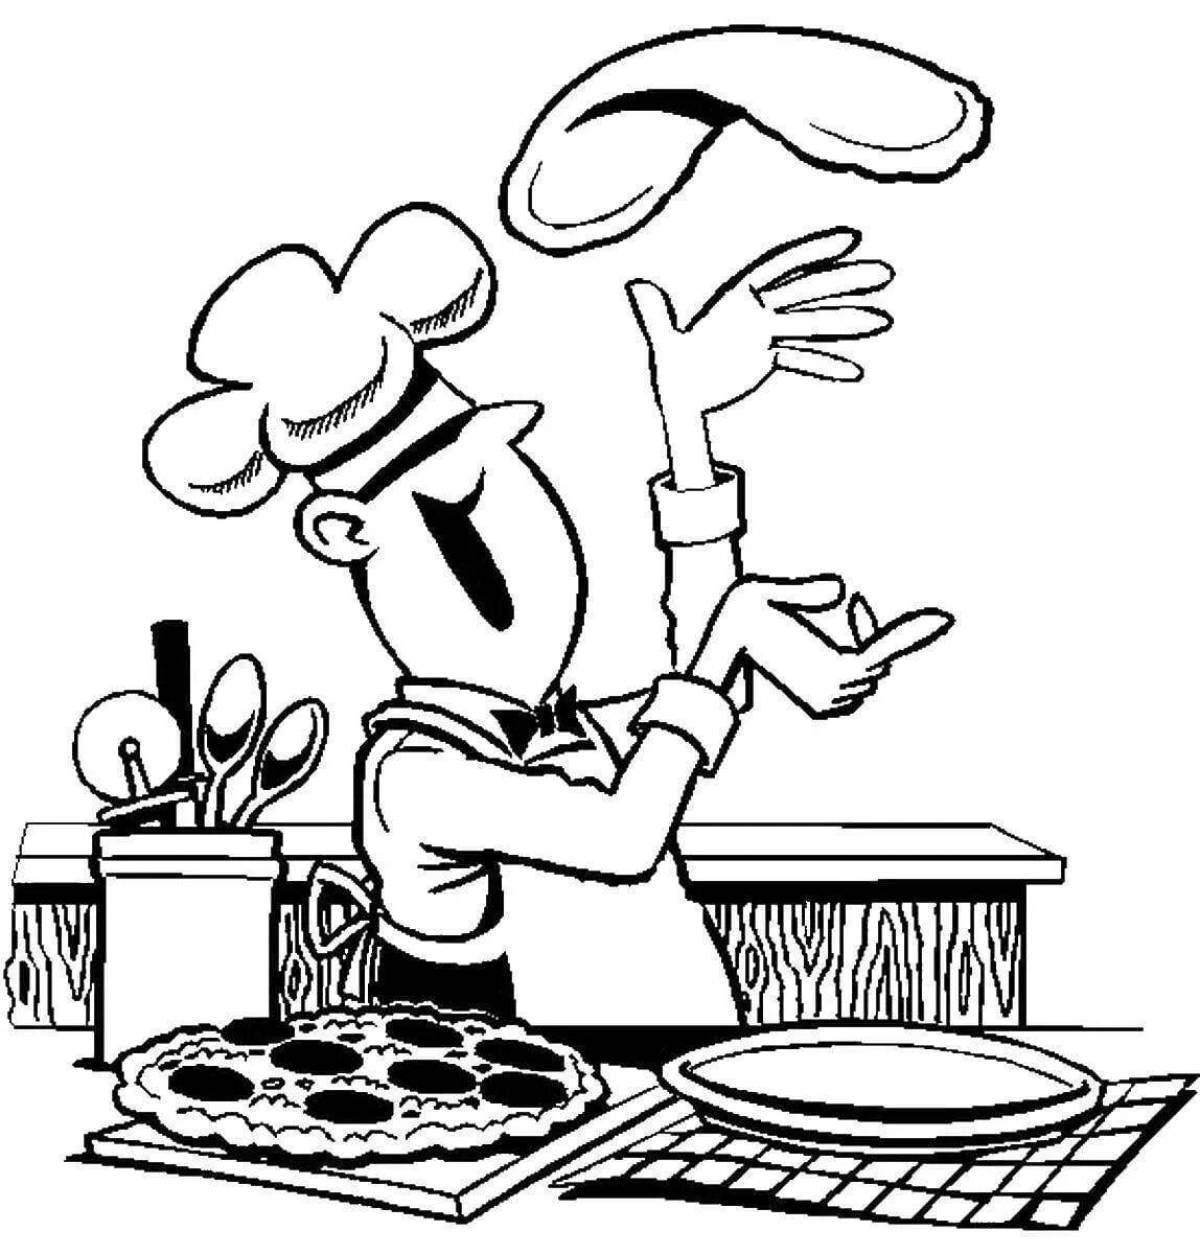 Coloring pages with live chef